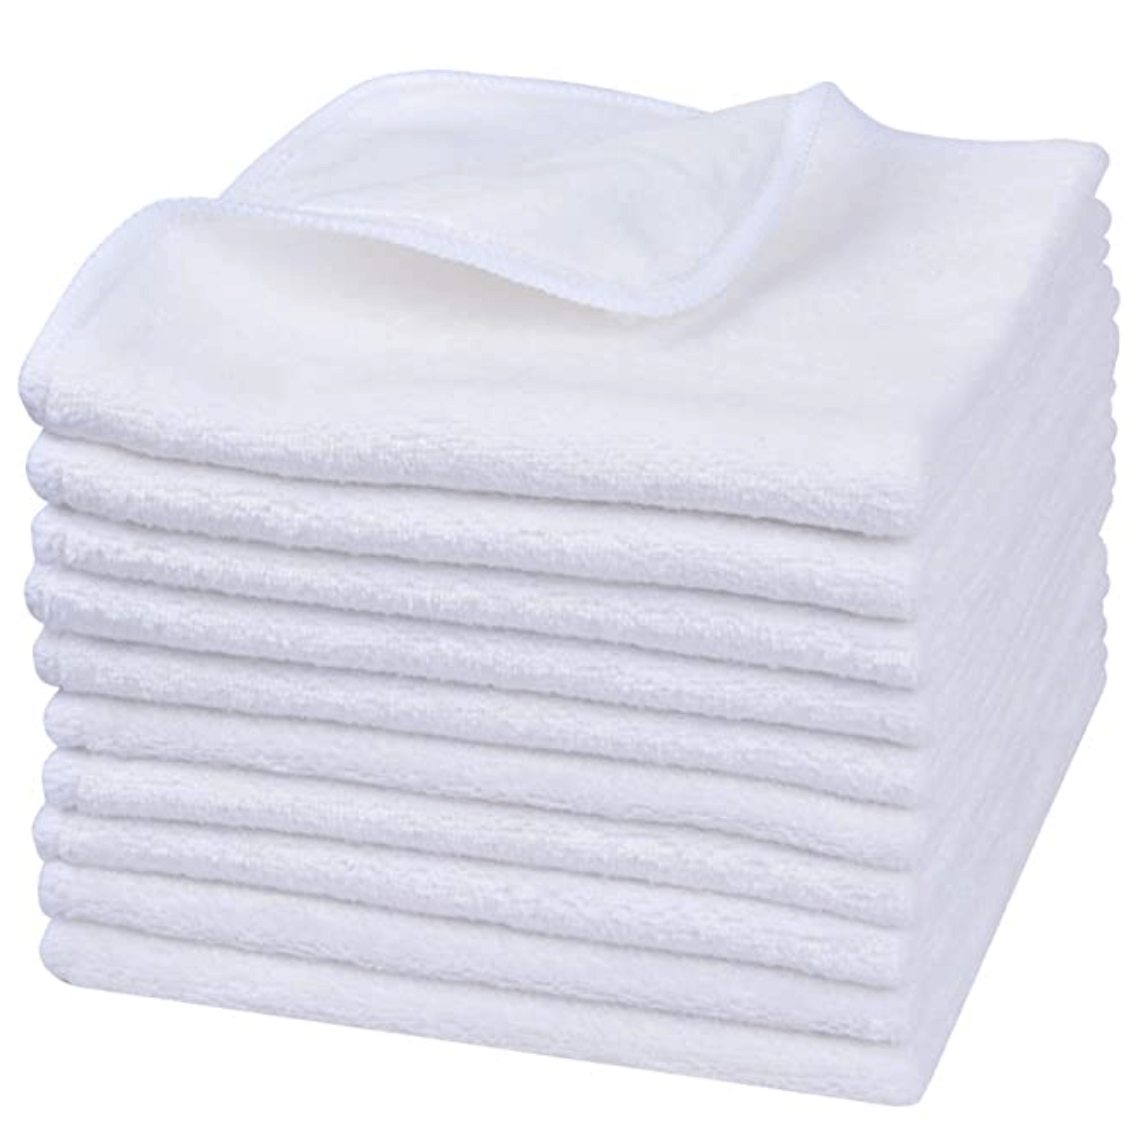 microfiber makeup remover cloths (the only thing I need to remove makeup)